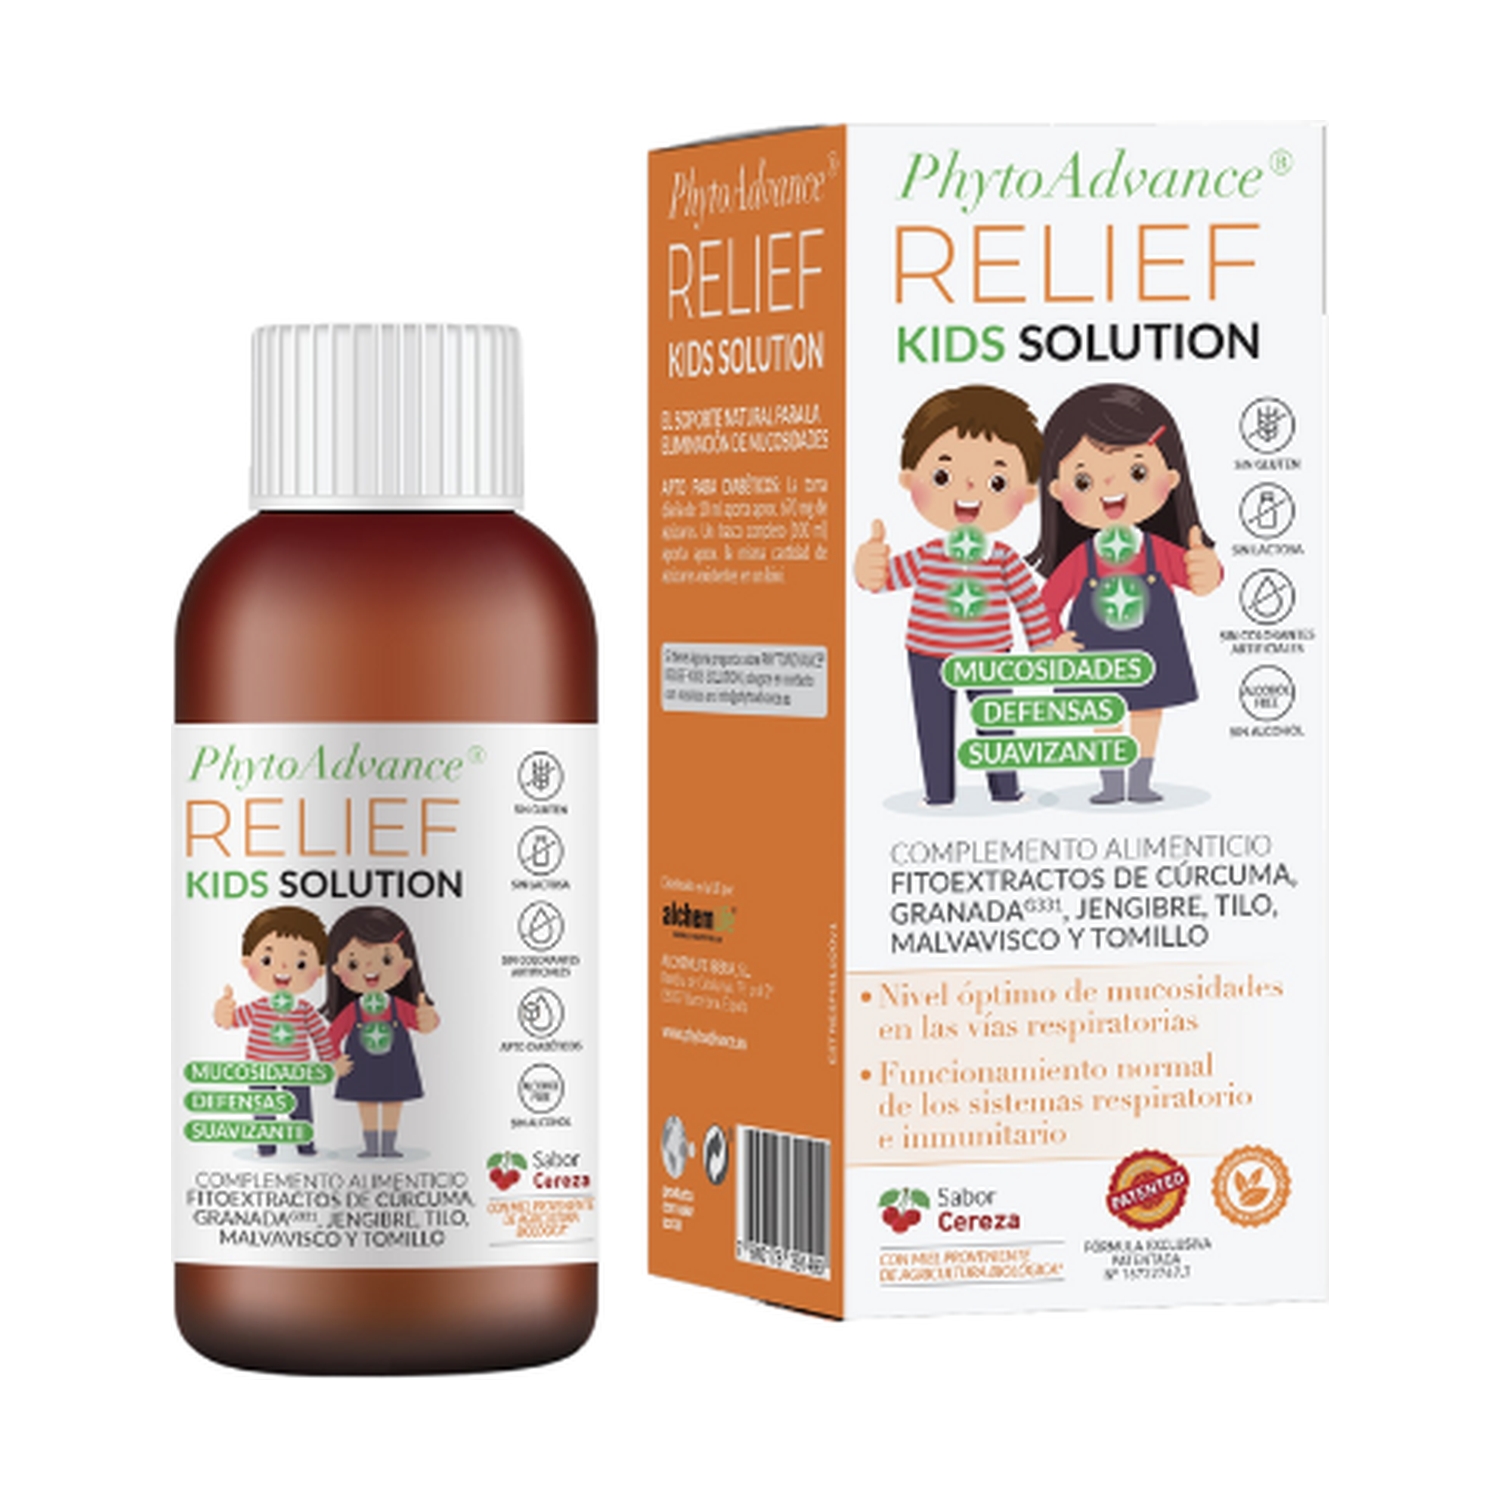 PhytoAdvance  RELIEF KIDS SOLUTION (100 ml)